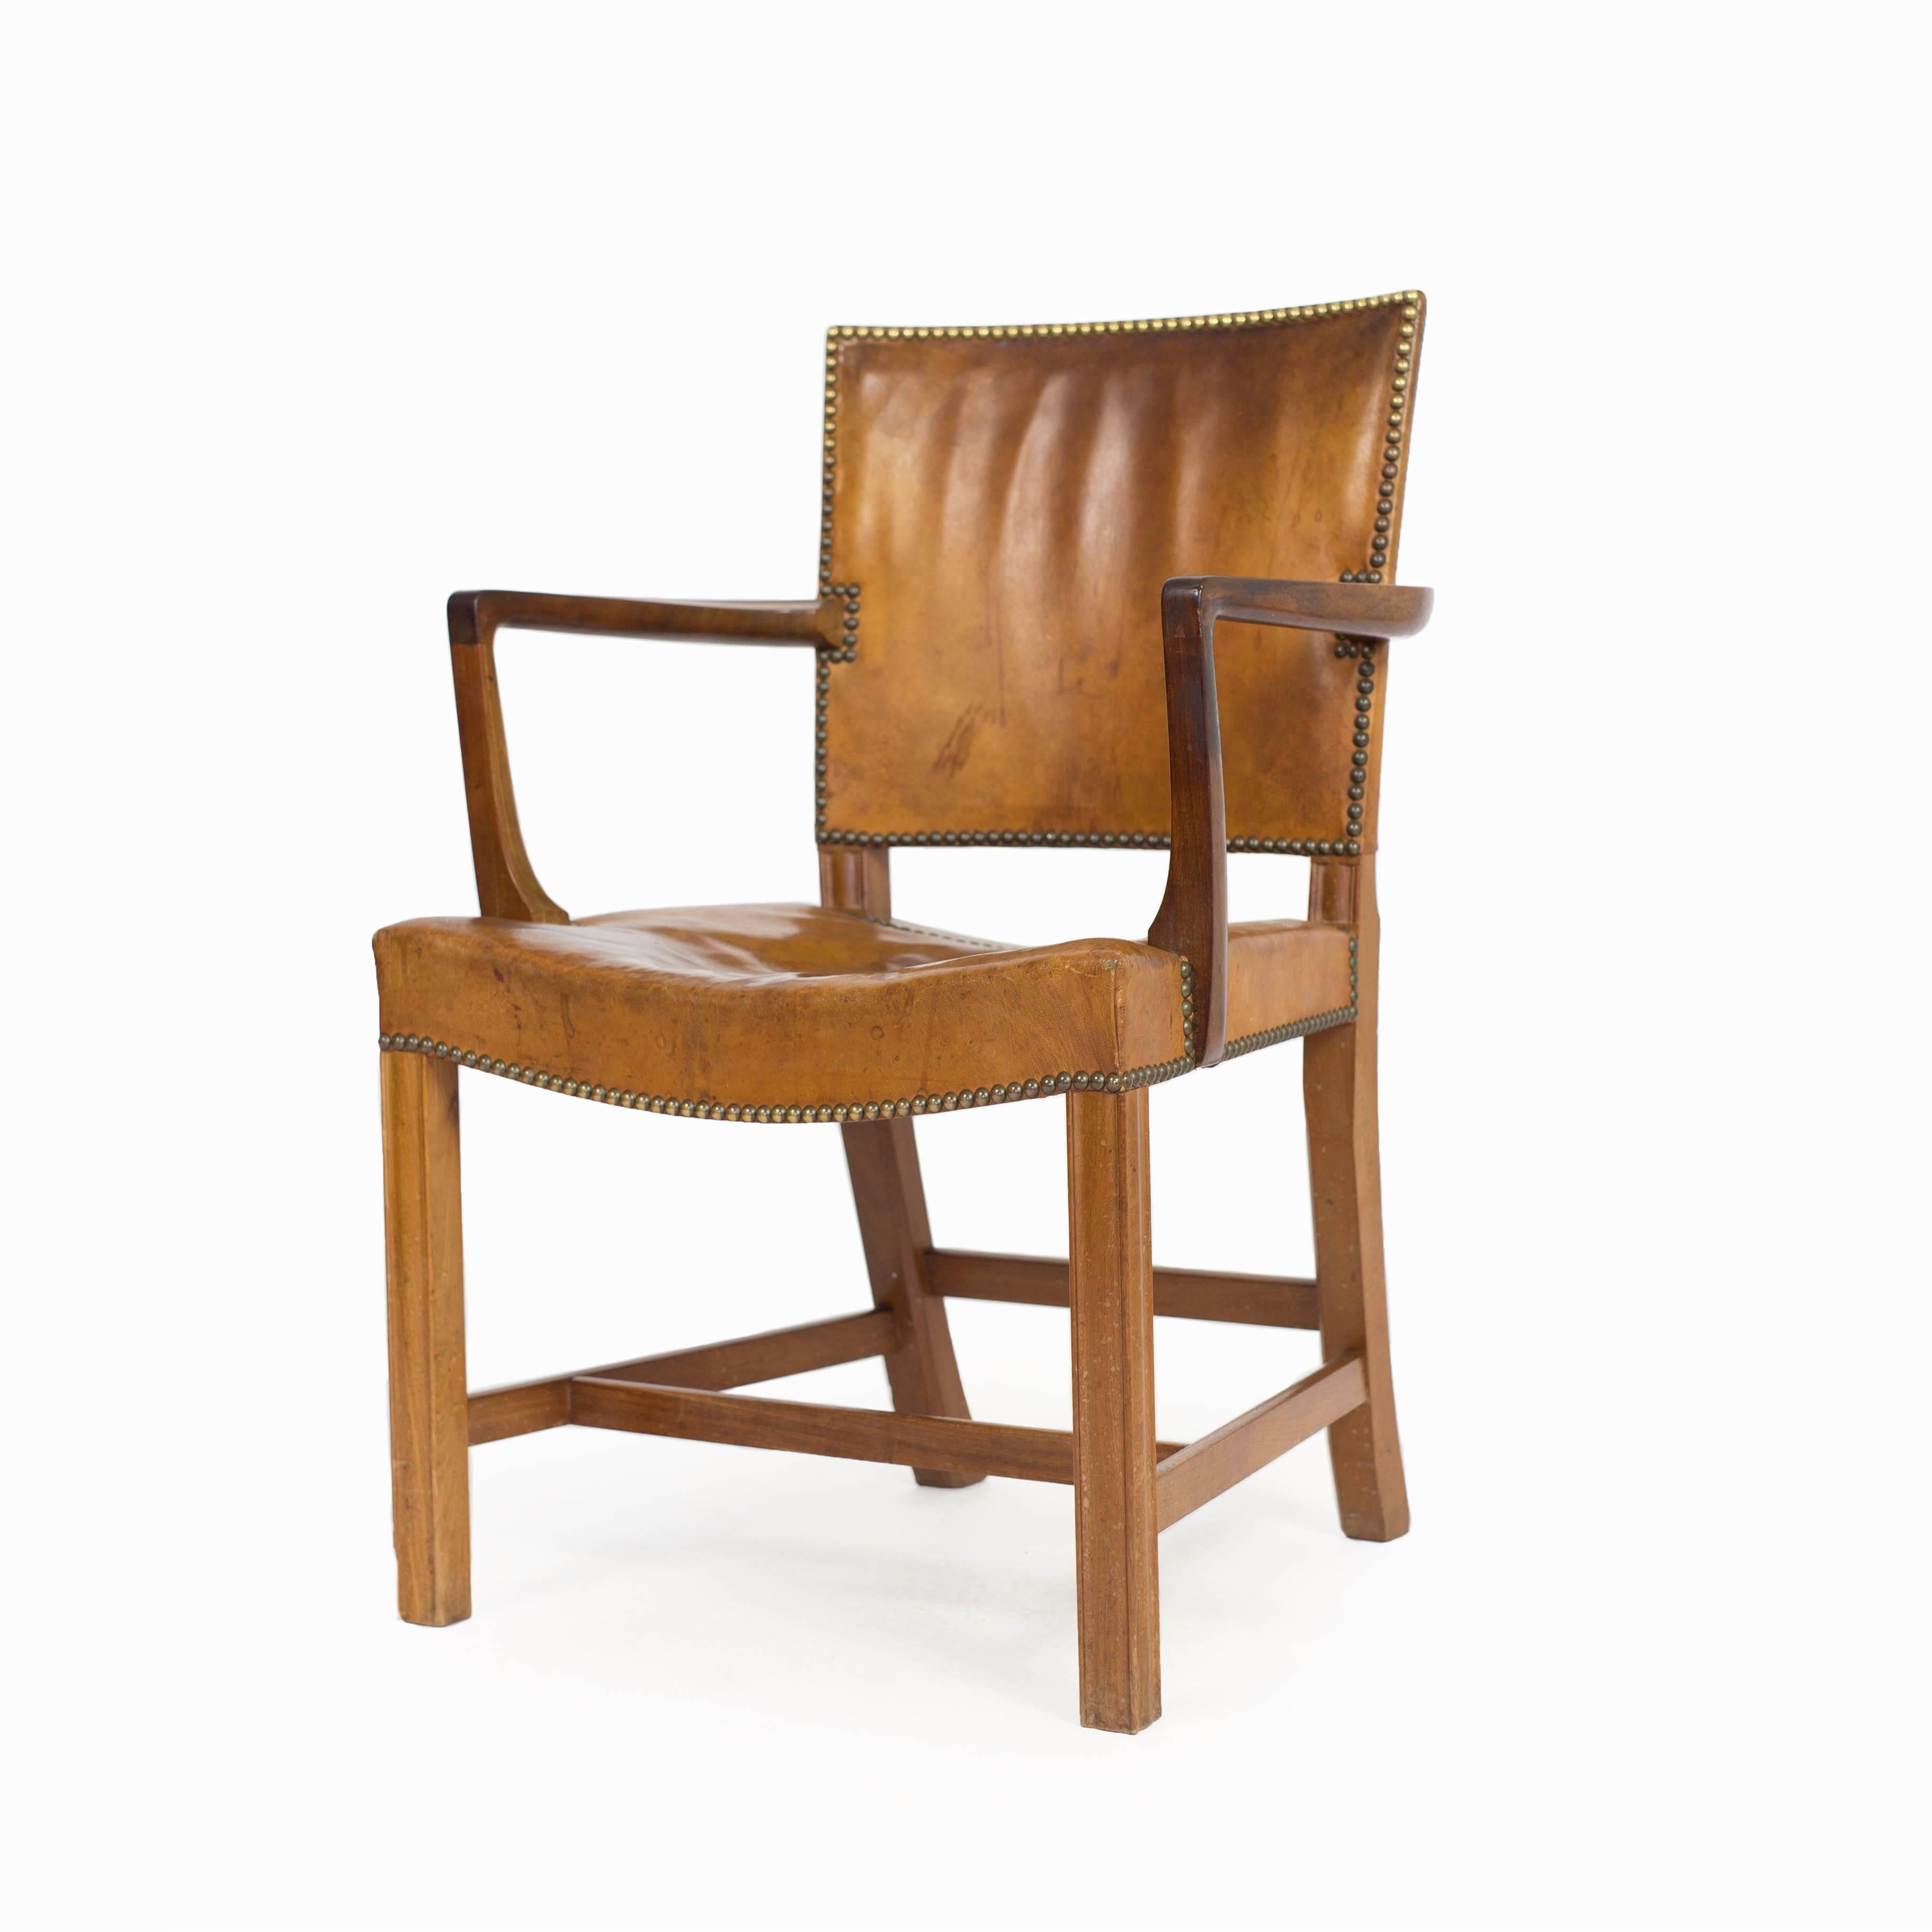 Mid-20th Century Early Kaare Klint Armchair, 1930, in Cuban Mahogany and Nigerian Leather For Sale